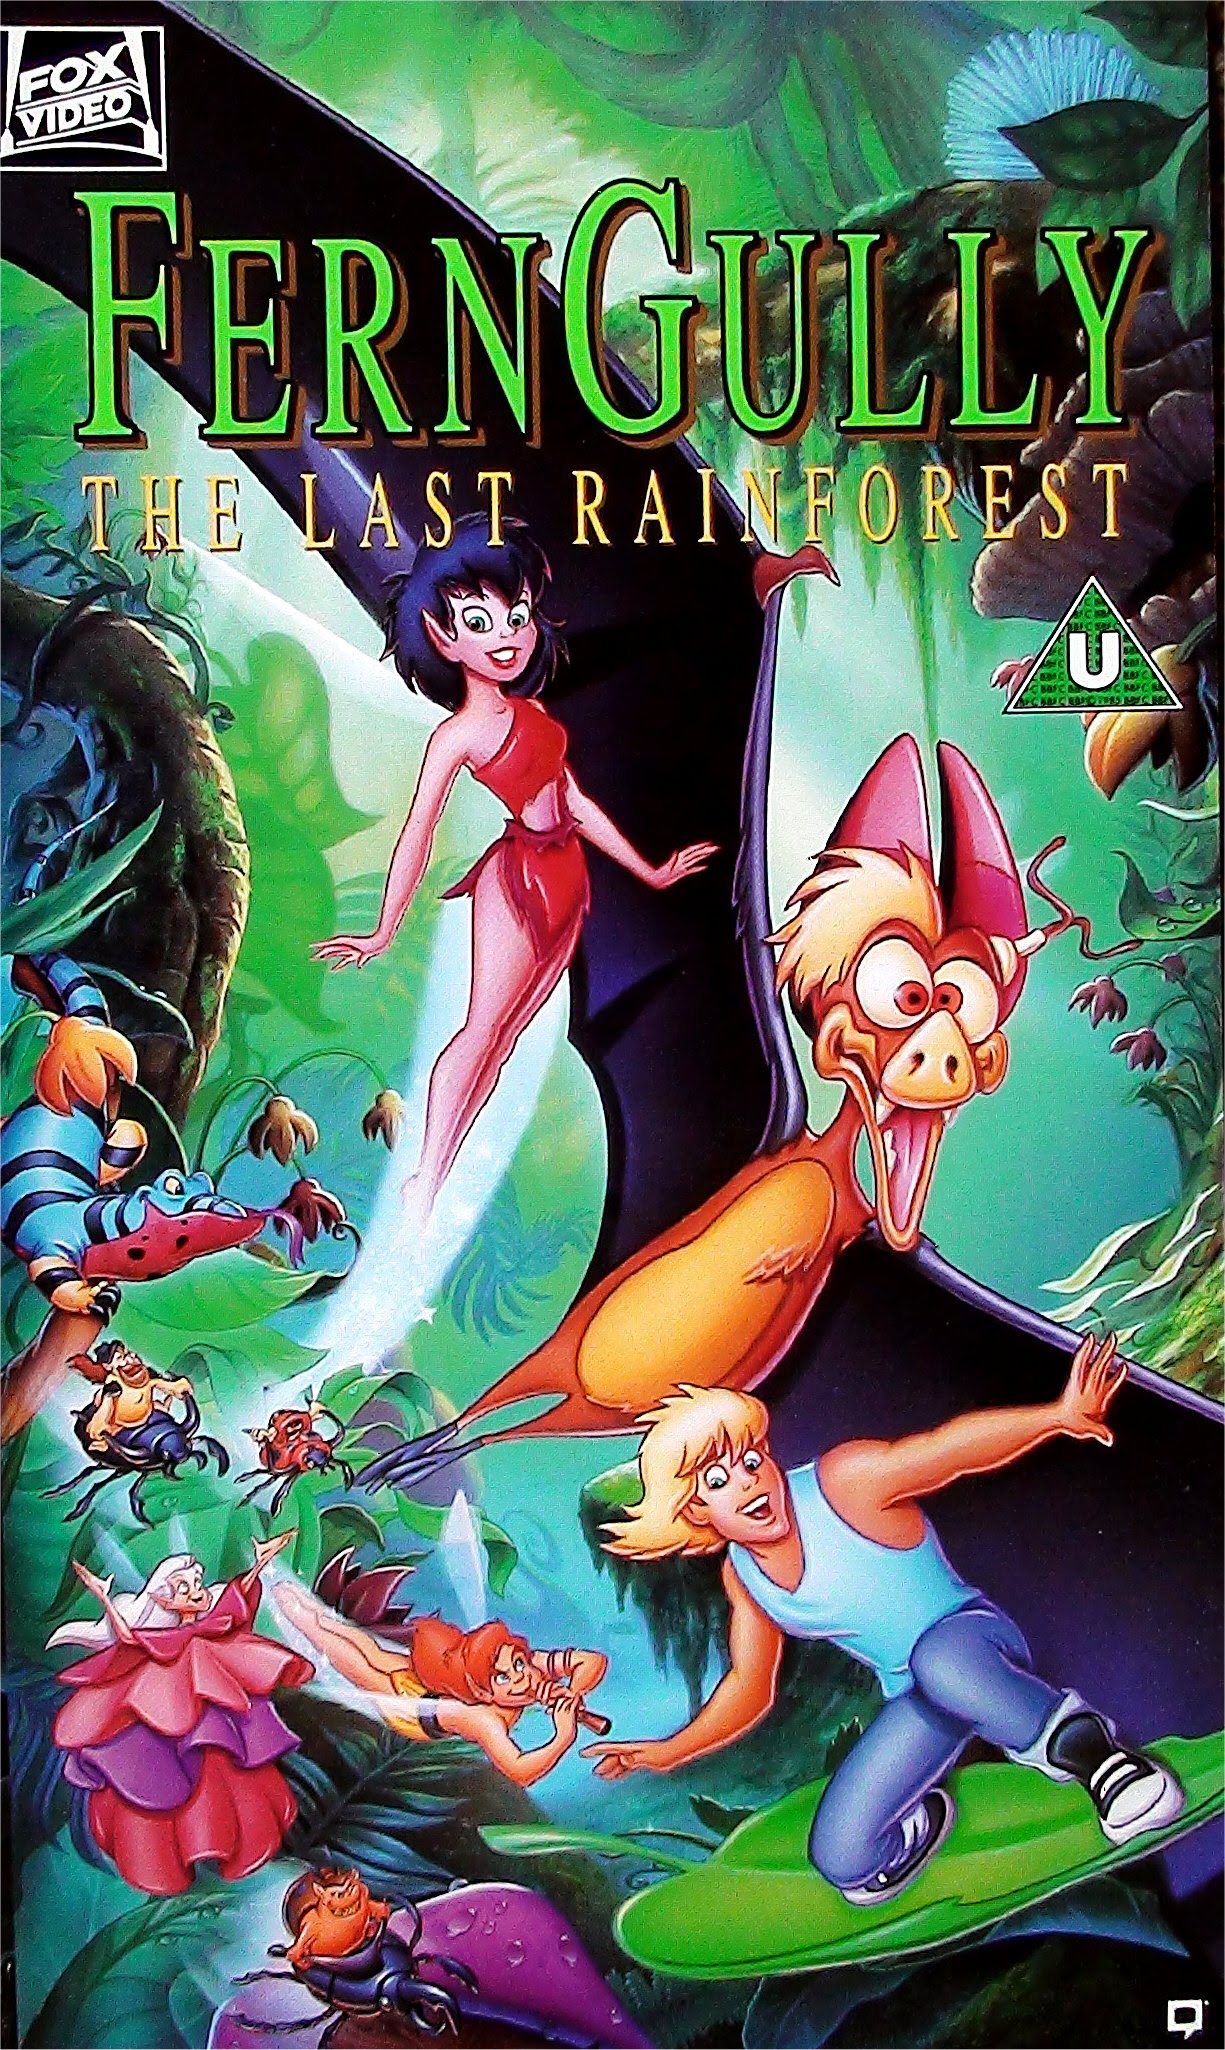 Ferngully: The Last Rainforest #26